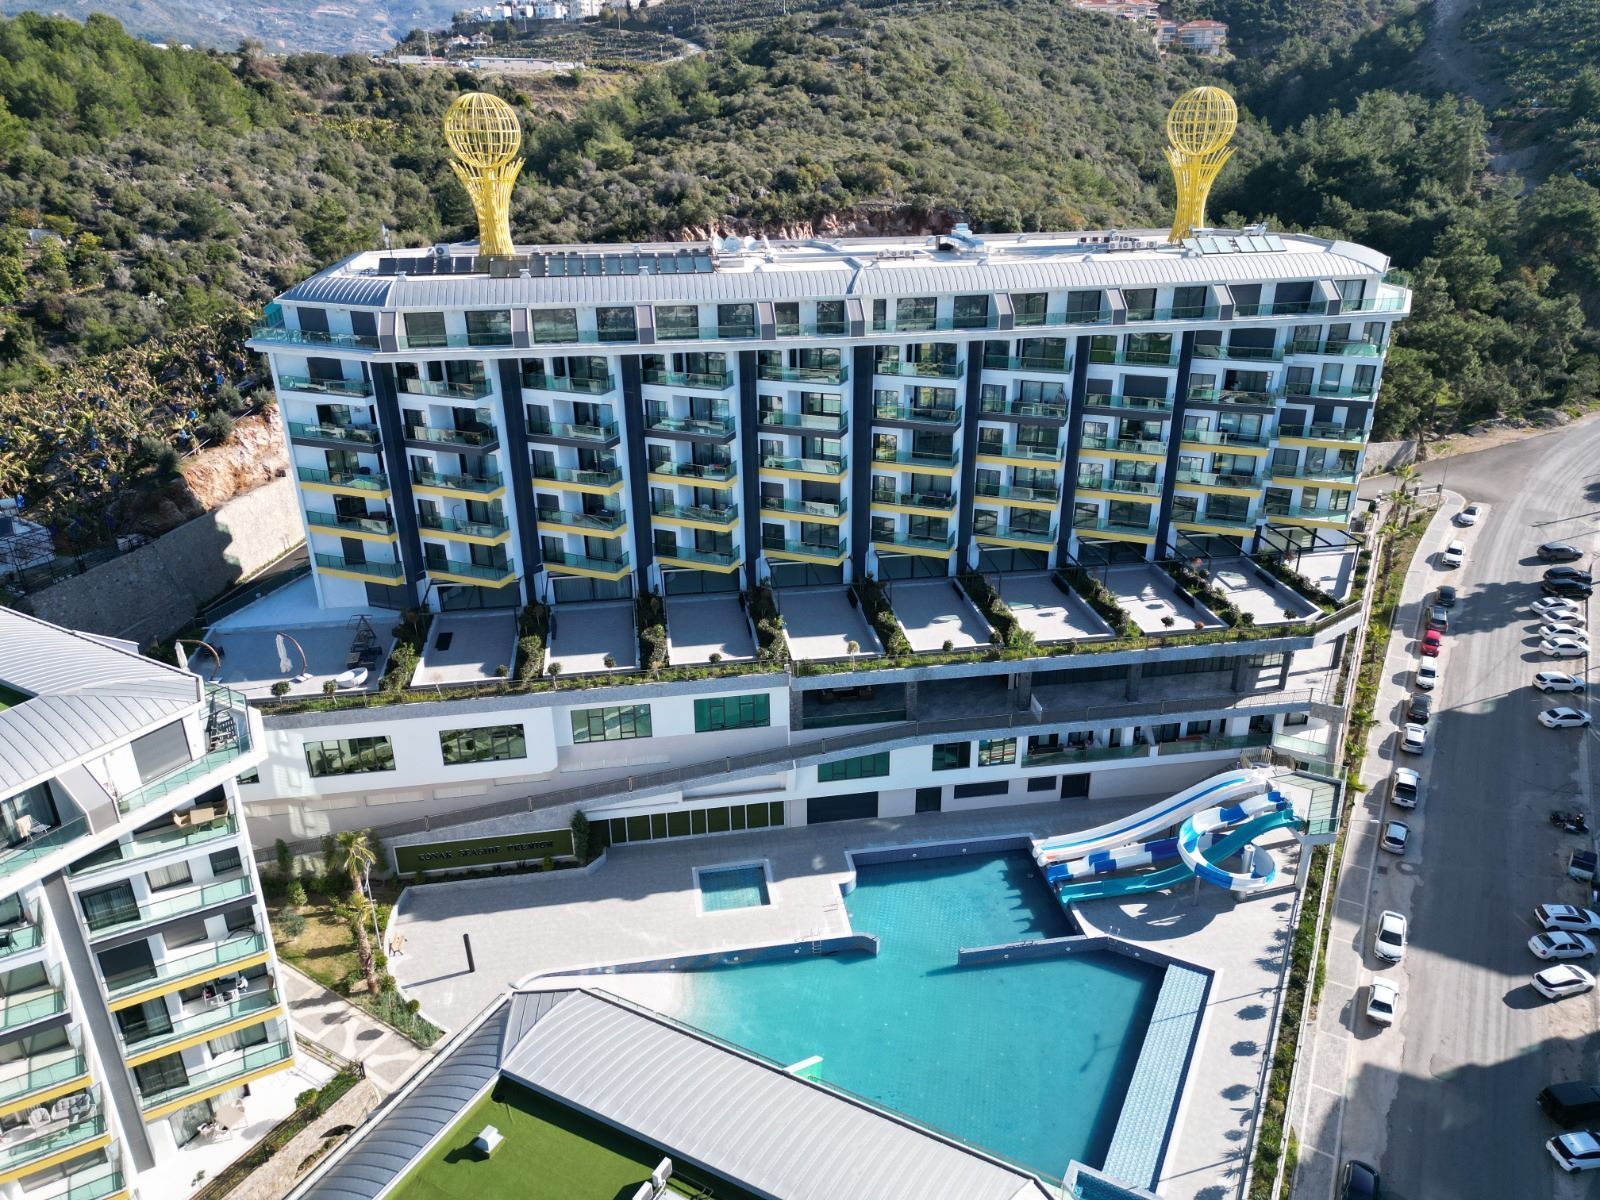 Apartments in the picturesque area of Kargıcak